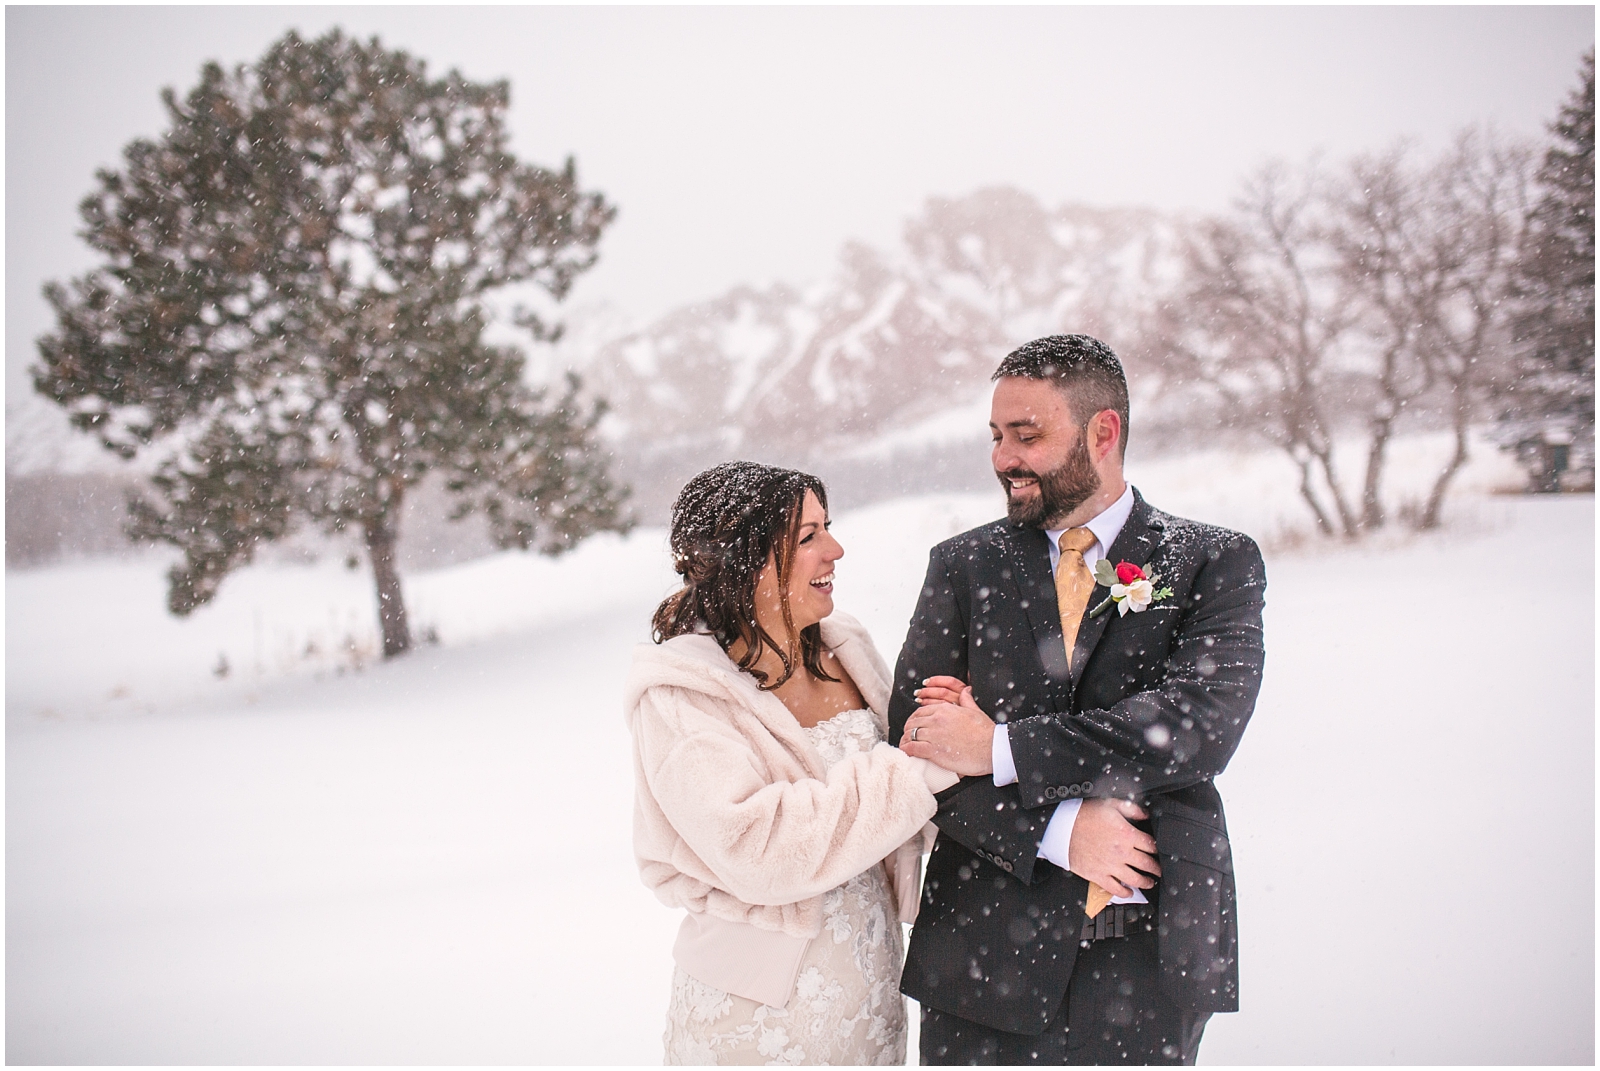 Bride and groom laughing in the snow at Arrowhead Golf Club winter wedding